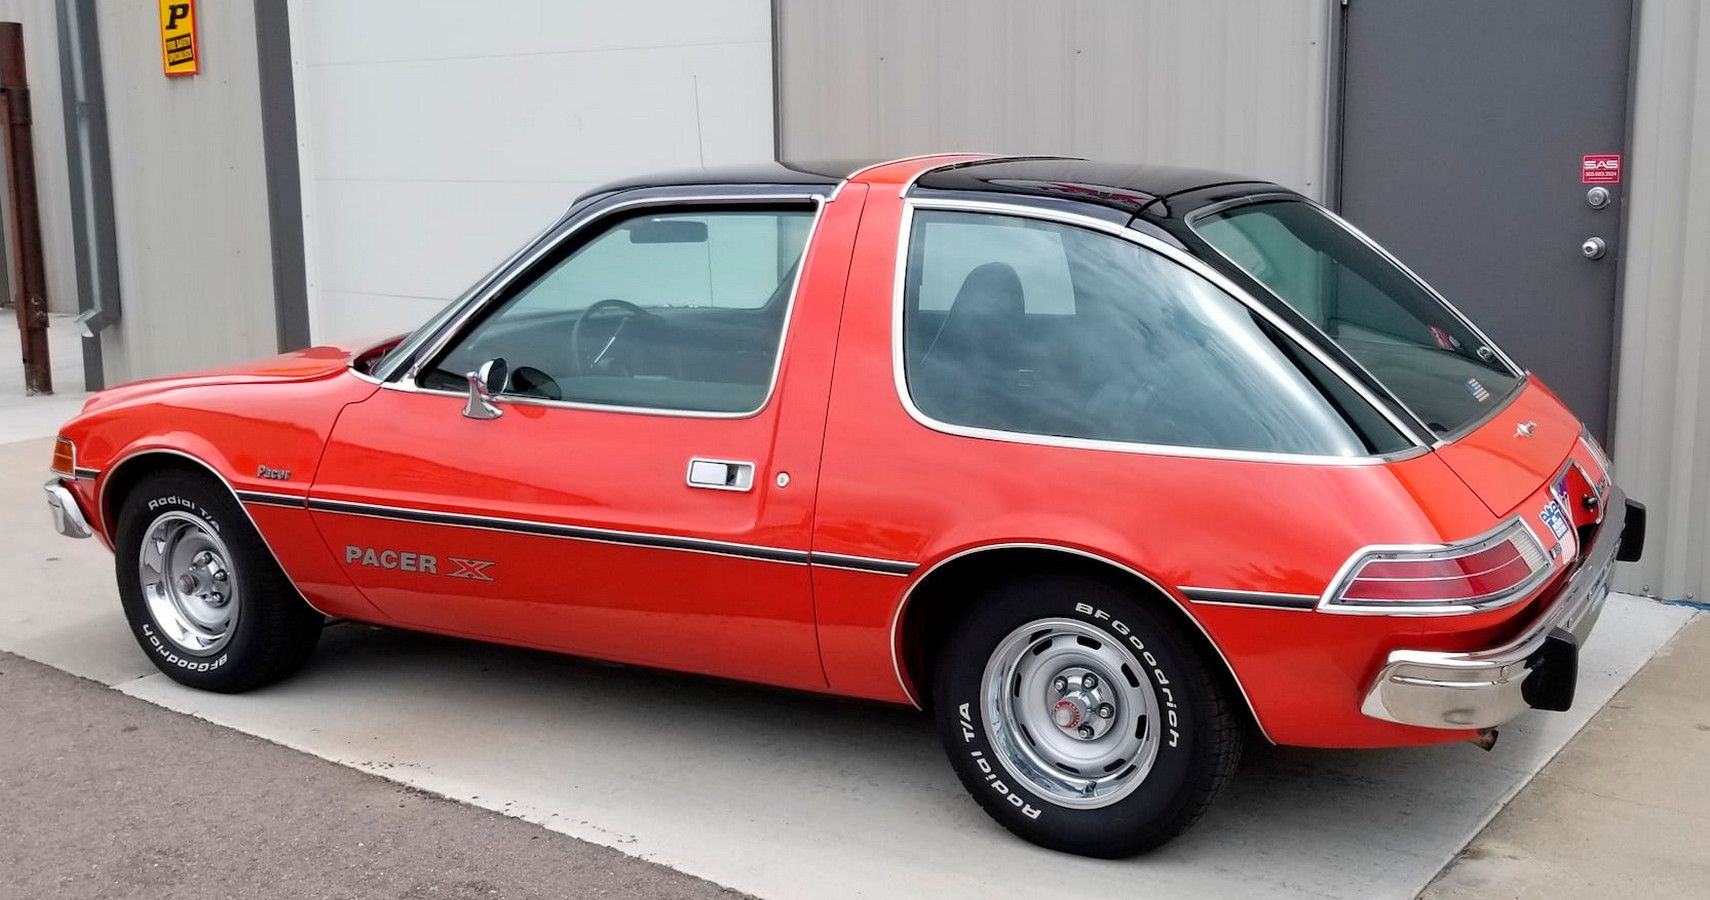 The Ugliest Cars Of The 1980s